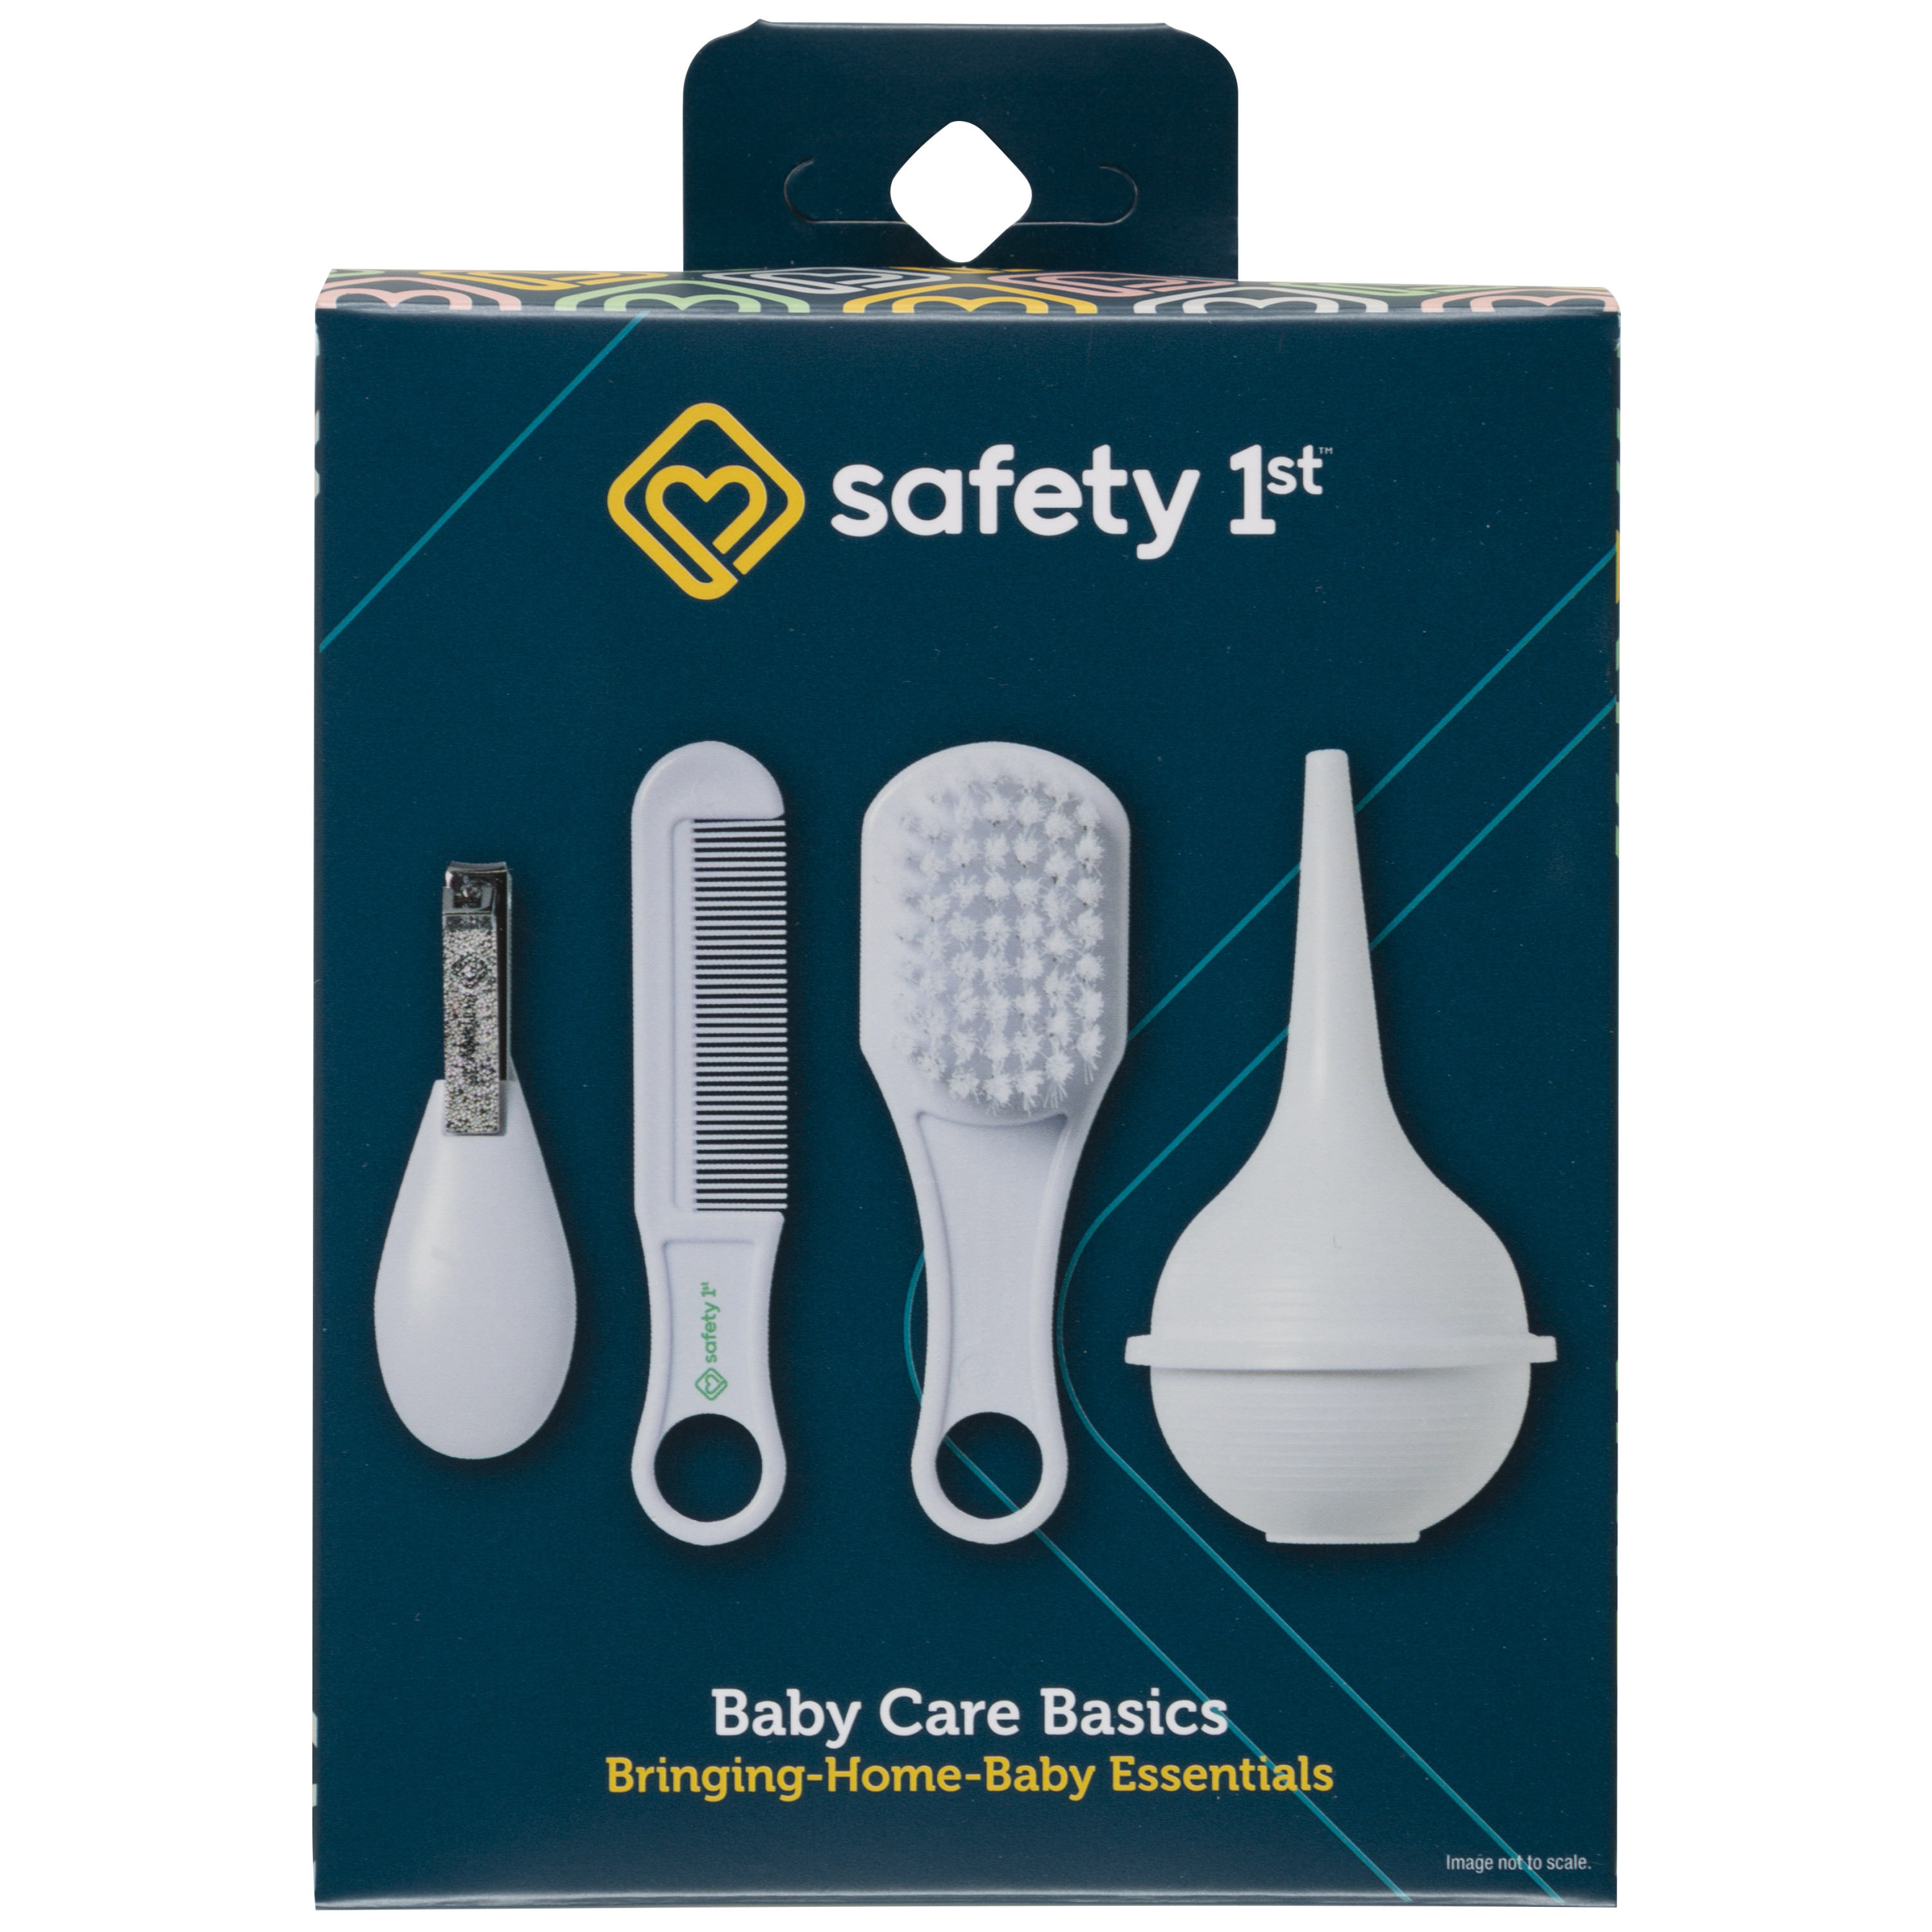 Safety 1st Baby Care Basics 4 Piece Infant Essentials Set, White - image 1 of 10